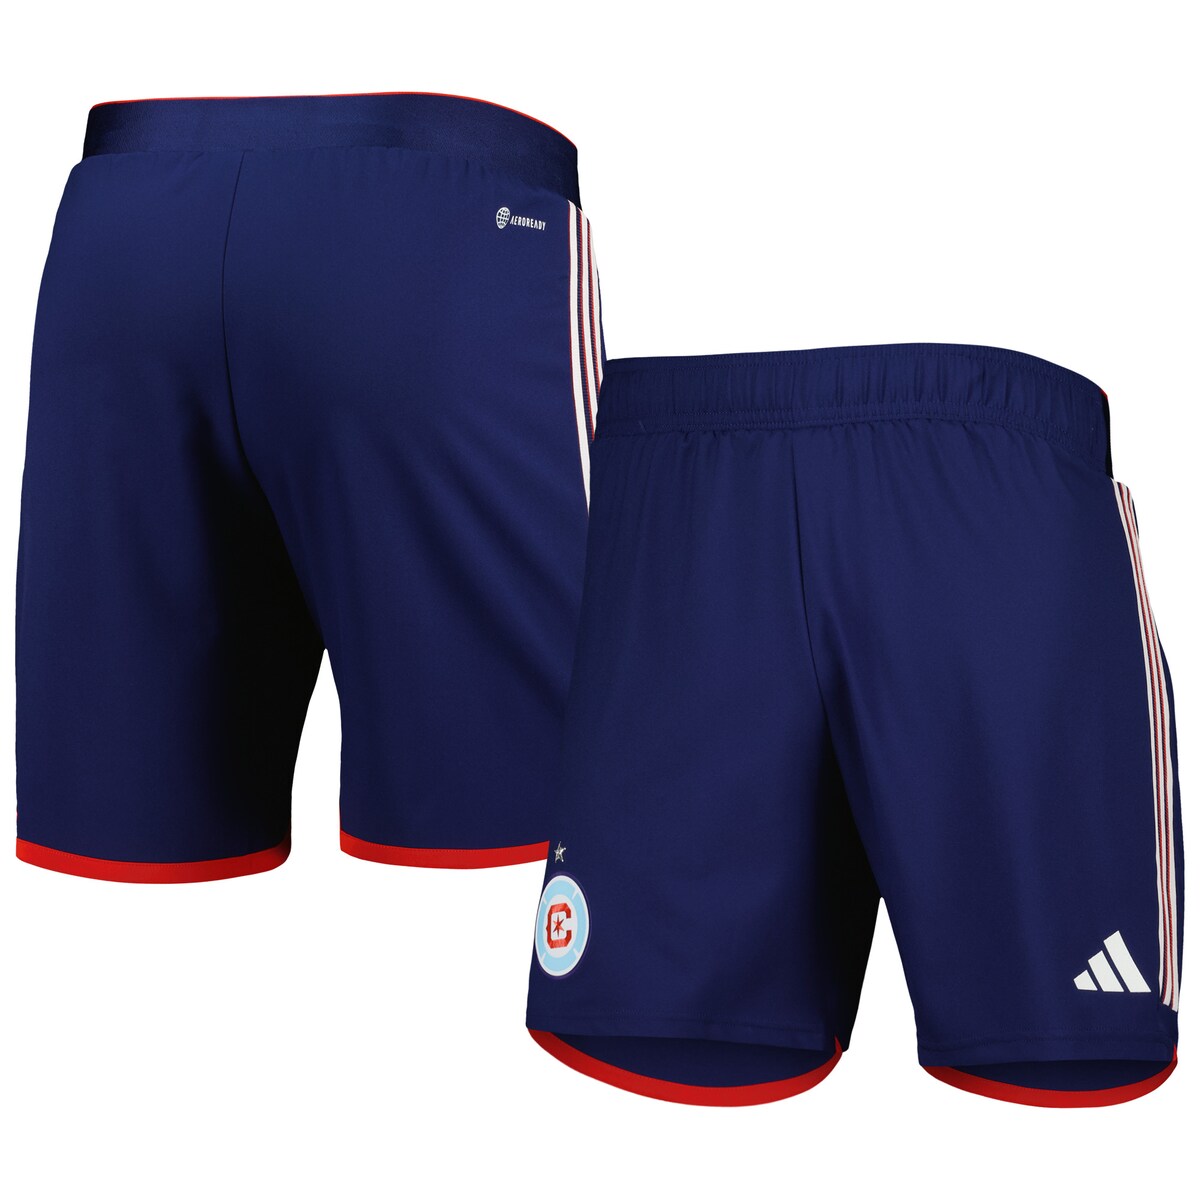 Whether you're honing your skills or hanging around the house, these spirited adidas shorts are just what you need to stay comfortable. These stylish bottoms feature embroidered team graphics and an authentic design to get you looking like a proper Chicago Fire fan. AEROREADY fabric wicks away moisture, which helps keep you cool and dry while you cheer Chicago Fire to victory.Machine wash, tumble dry lowOfficially licensedAEROREADY technology absorbs moisture and makes you feel dryHeat-sealed graphicsSewn-on stripesImportedInseam on size M measures approx. 6.75''Brand: adidasElastic waistbandHeat-sealed fabric appliqueMaterial: 100% Recycled Polyester